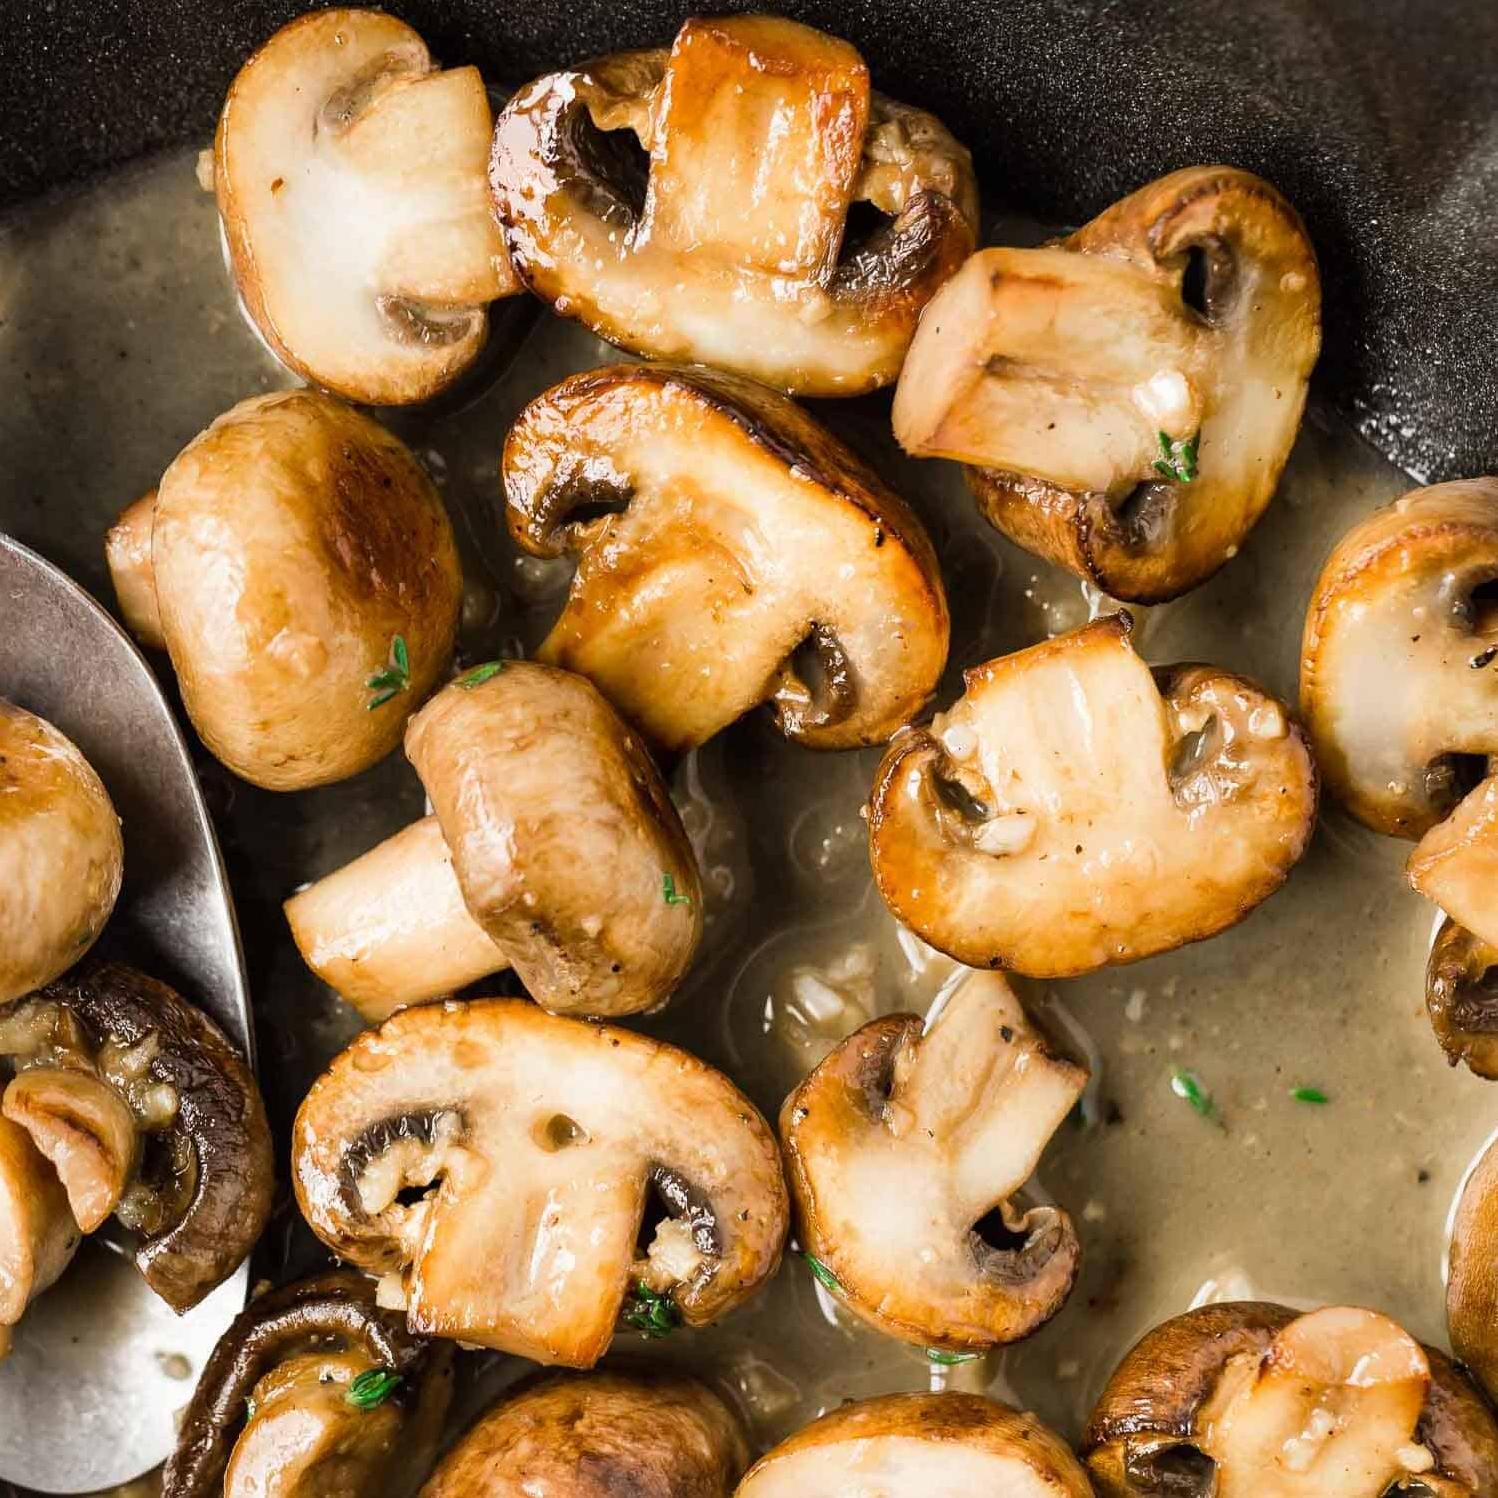  A simple yet sophisticated way to elevate your mushroom game.